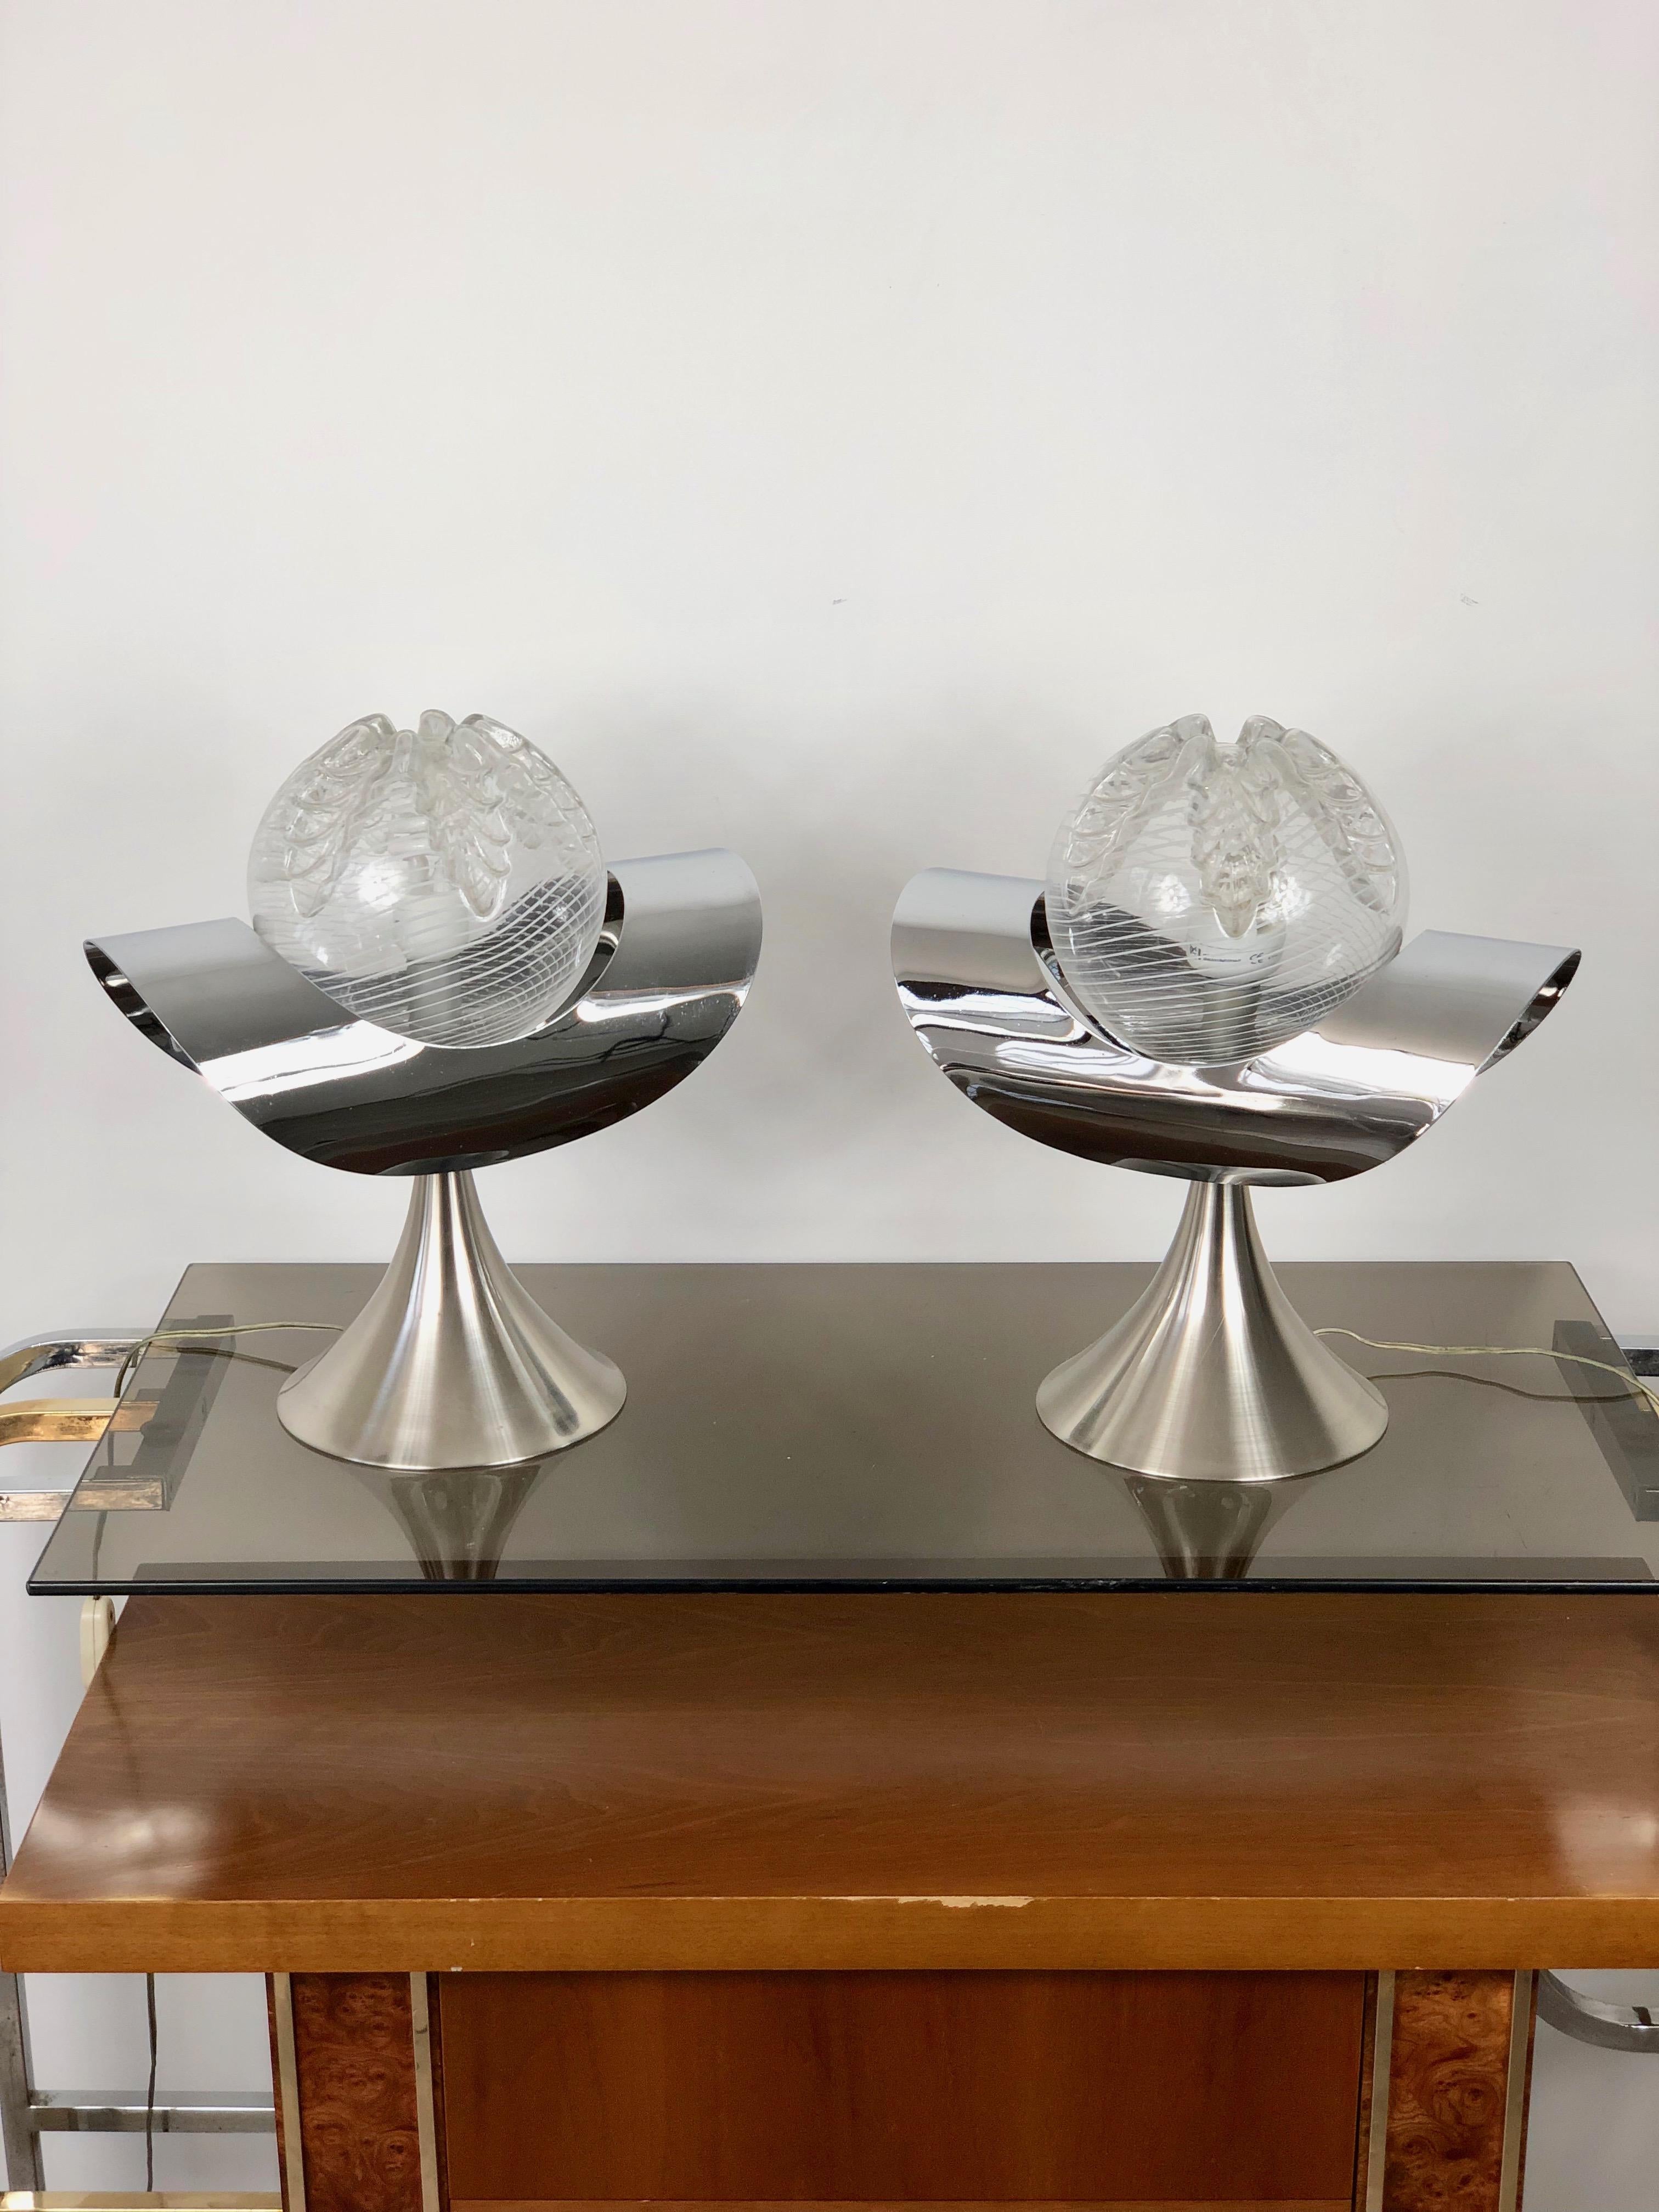 Pair of two table lamps in chrome and glass with a steel base. Typical vintage lamp of the 1970s Italian period.